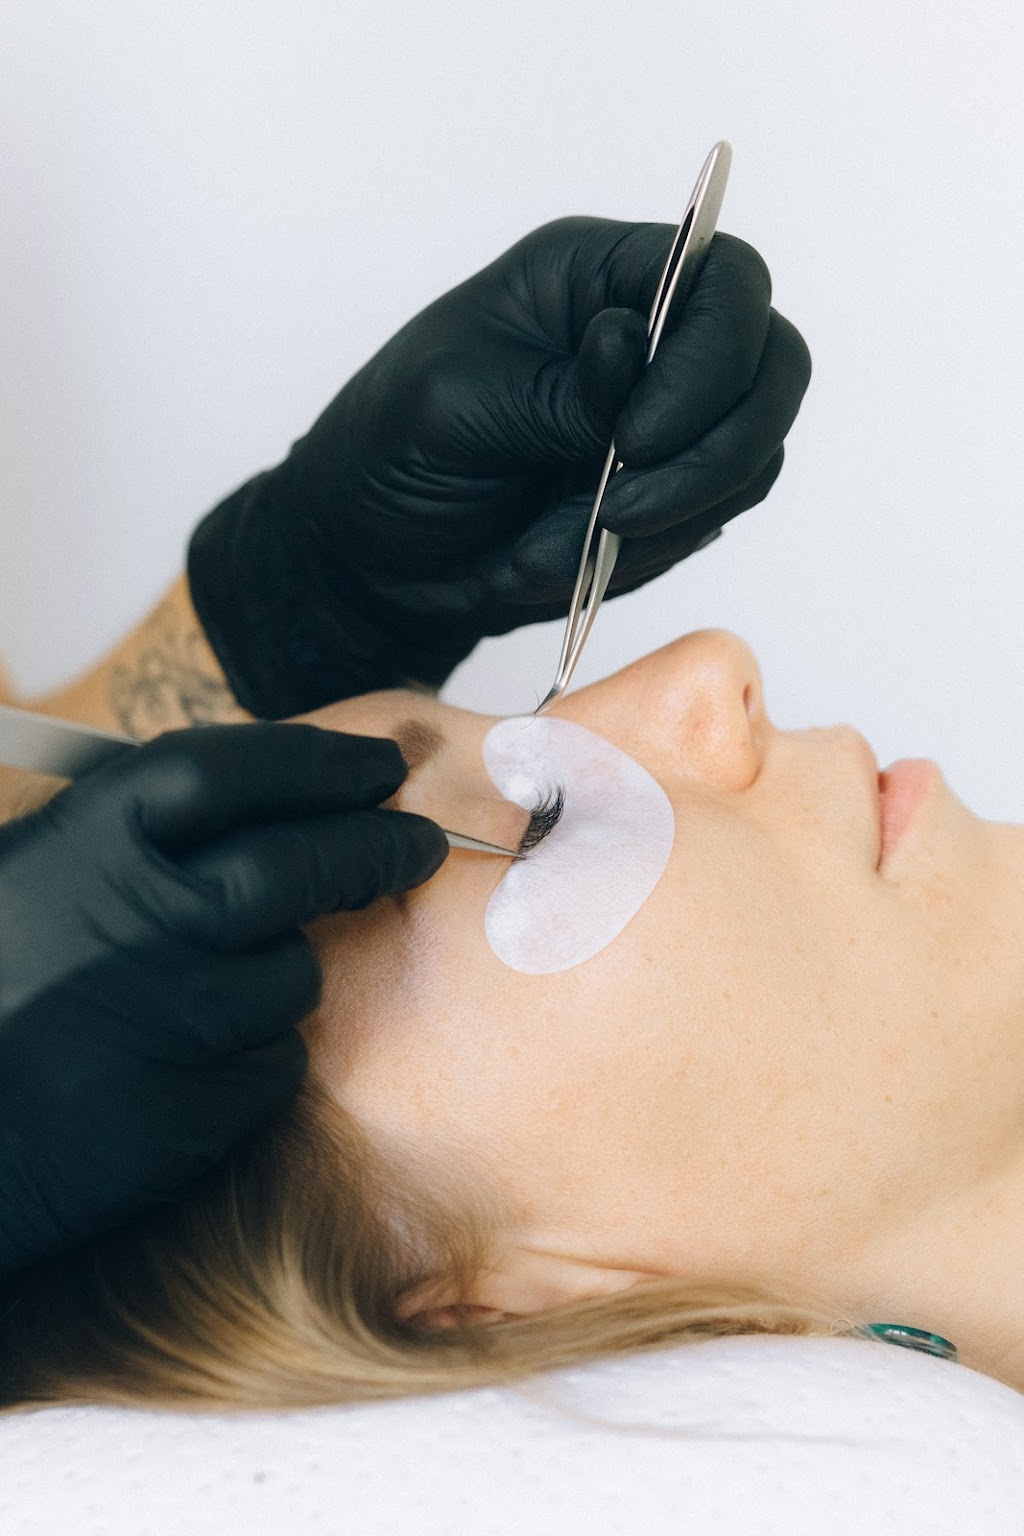 Sprucies Dermal Therapy Moree | beauty salon | 25 Heber St, Moree NSW 2400, Australia | 0427714920 OR +61 427 714 920